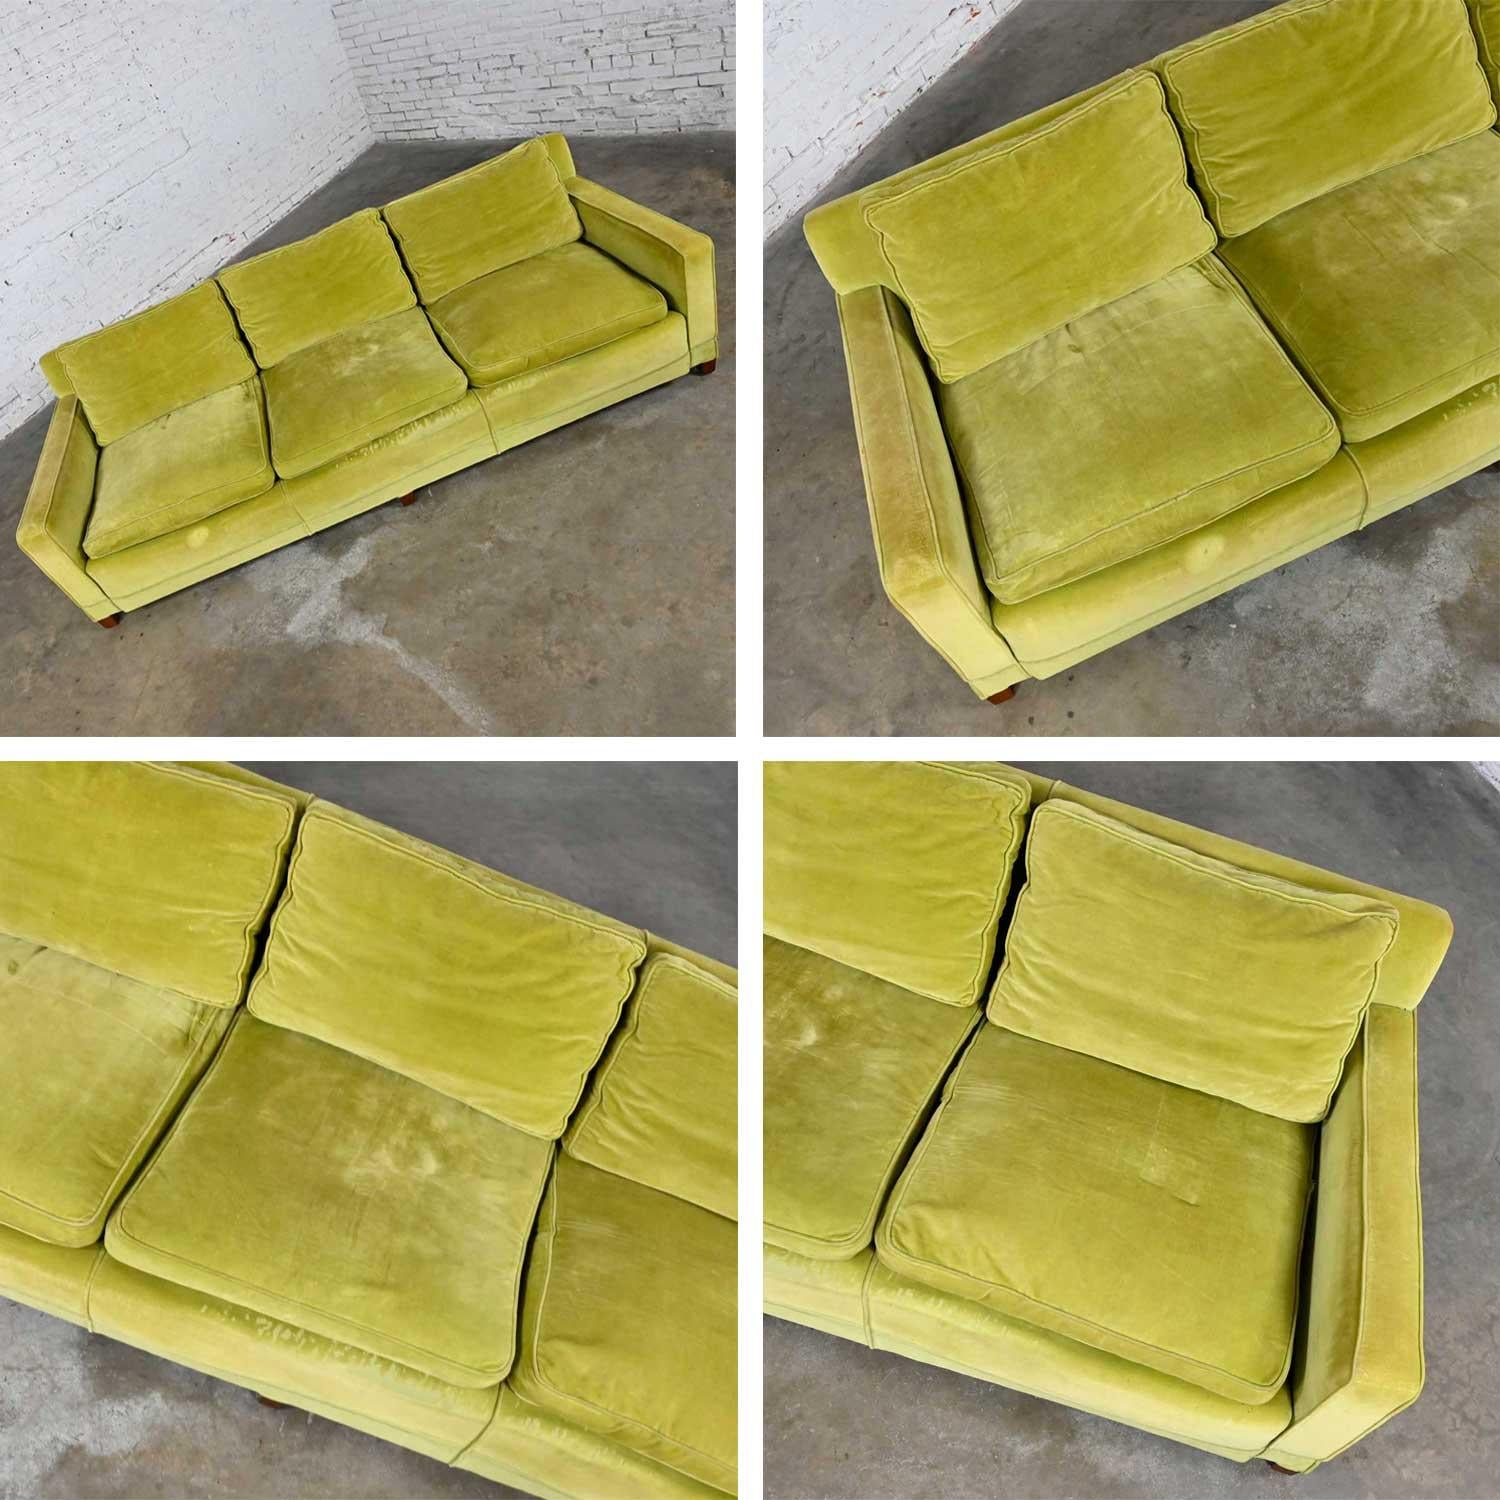 Vint Mid-Century Modern Feather Lawson Style Sofa Frame Only Needs Upholstered 7